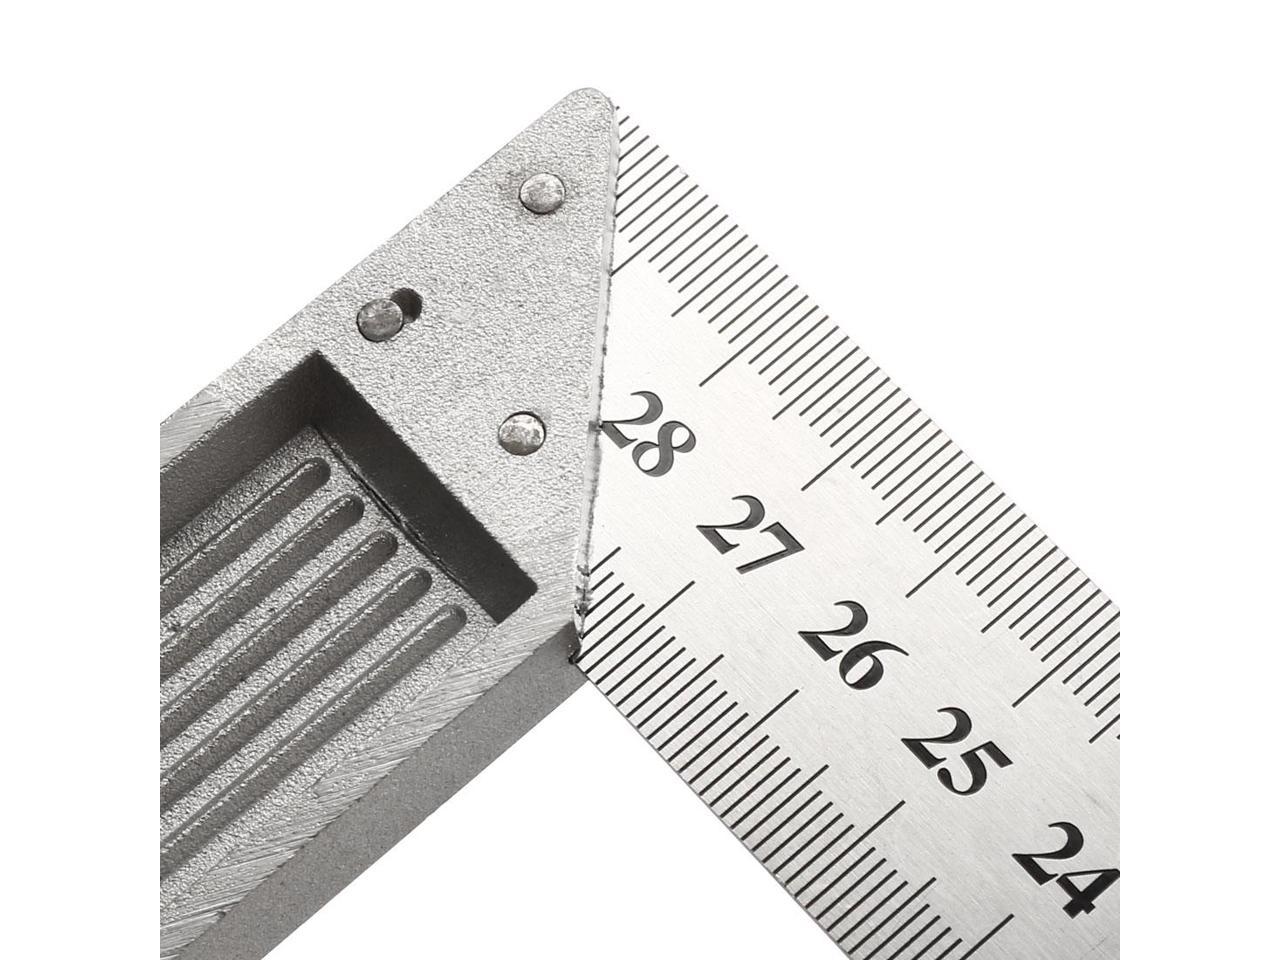 L Square 300mm Stainless Steel 90 Degree Angle Ruler Right Measuring Layout Tool 